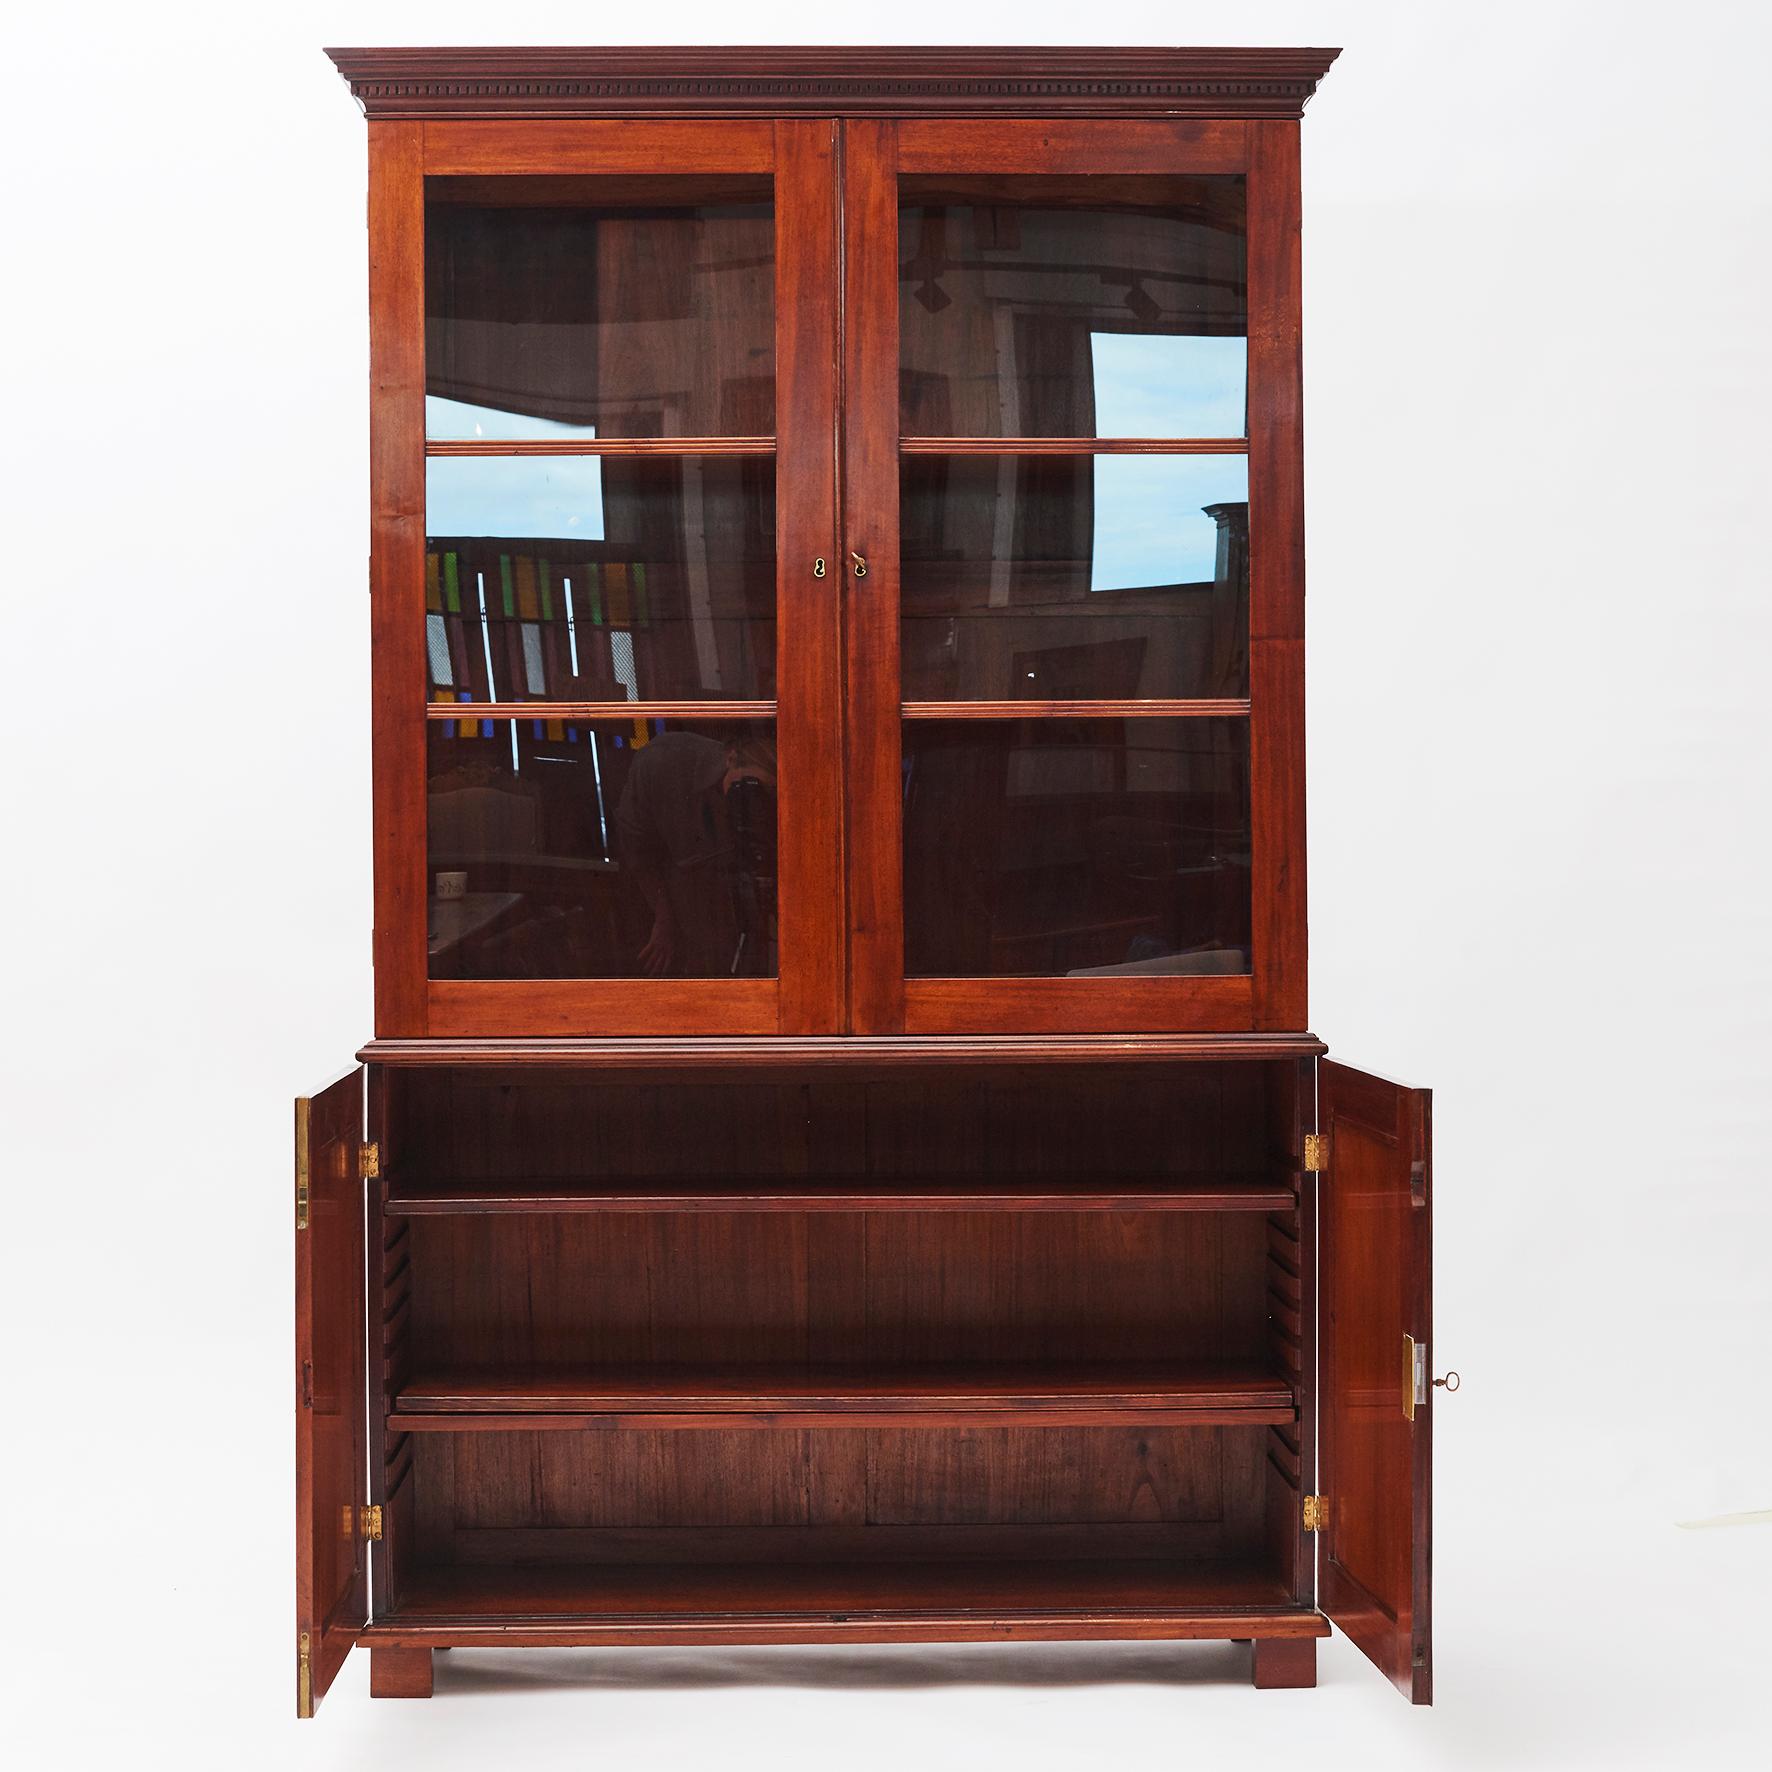 Empire display cabinet from the Danish West Indies (or today known as The Virgin Islands), circa 1810.
This beautiful solid Cuba mahogany cabinet features a top cabinet with double pane glass doors and a lower section with pair of doors.
The